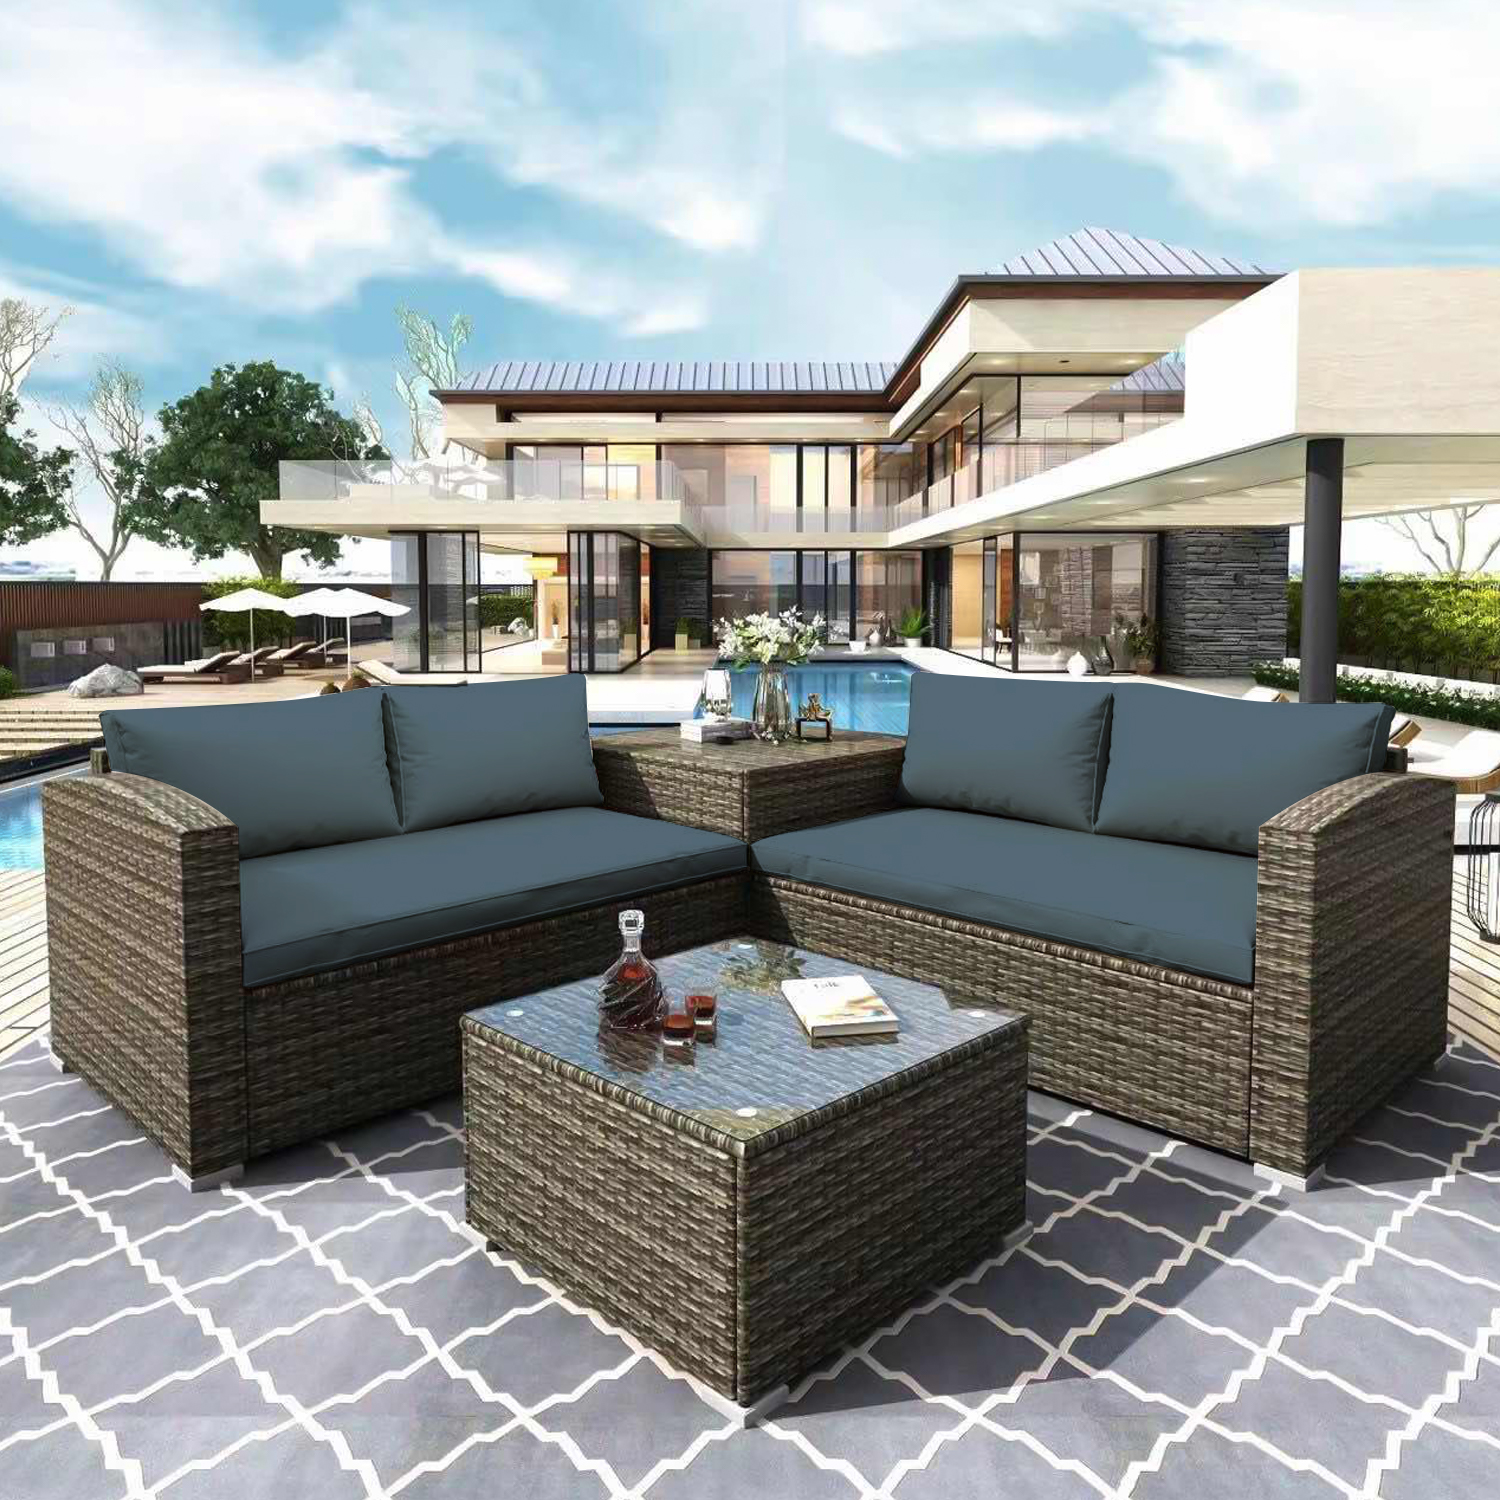 Outdoor Patio Furniture Set, Rattan Chairs & Seating Sets for Backyard, 4-Piece Wicker Conversation Set w/L-Seats Sofa, R-Seats Sofa, Cushion box, Tempered Glass Dining Table, Padded Cushions, S13116 - image 2 of 8